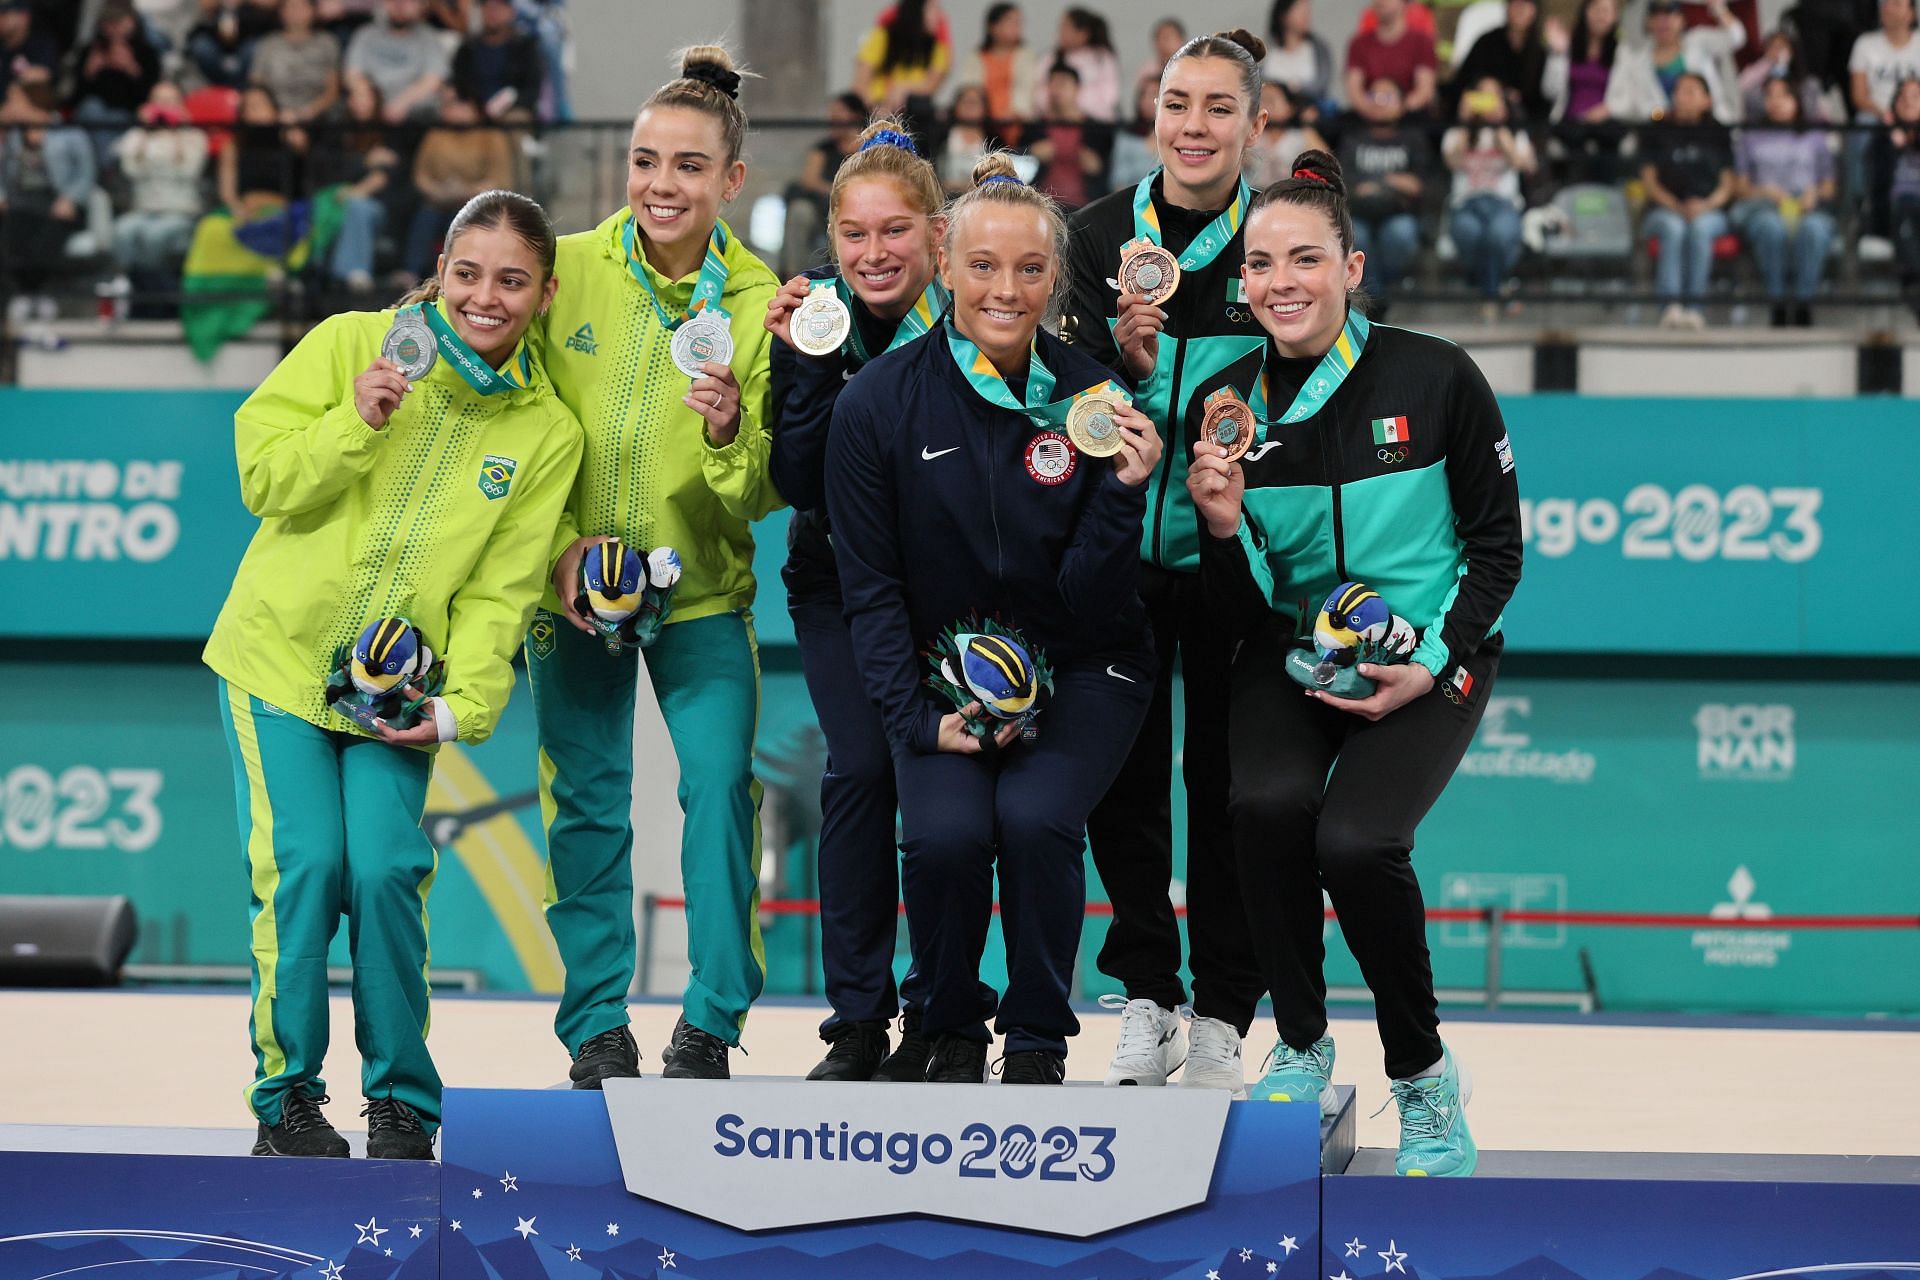 Silver medalistsTeam Brazil, Gold medalistsTeam United States, and Bronze medalists Team Mexico pose on the podium for Gymnastics - Women&#039;s Synchronized Trampoline at the 2023 Pan Am Games in Santiago, Chile